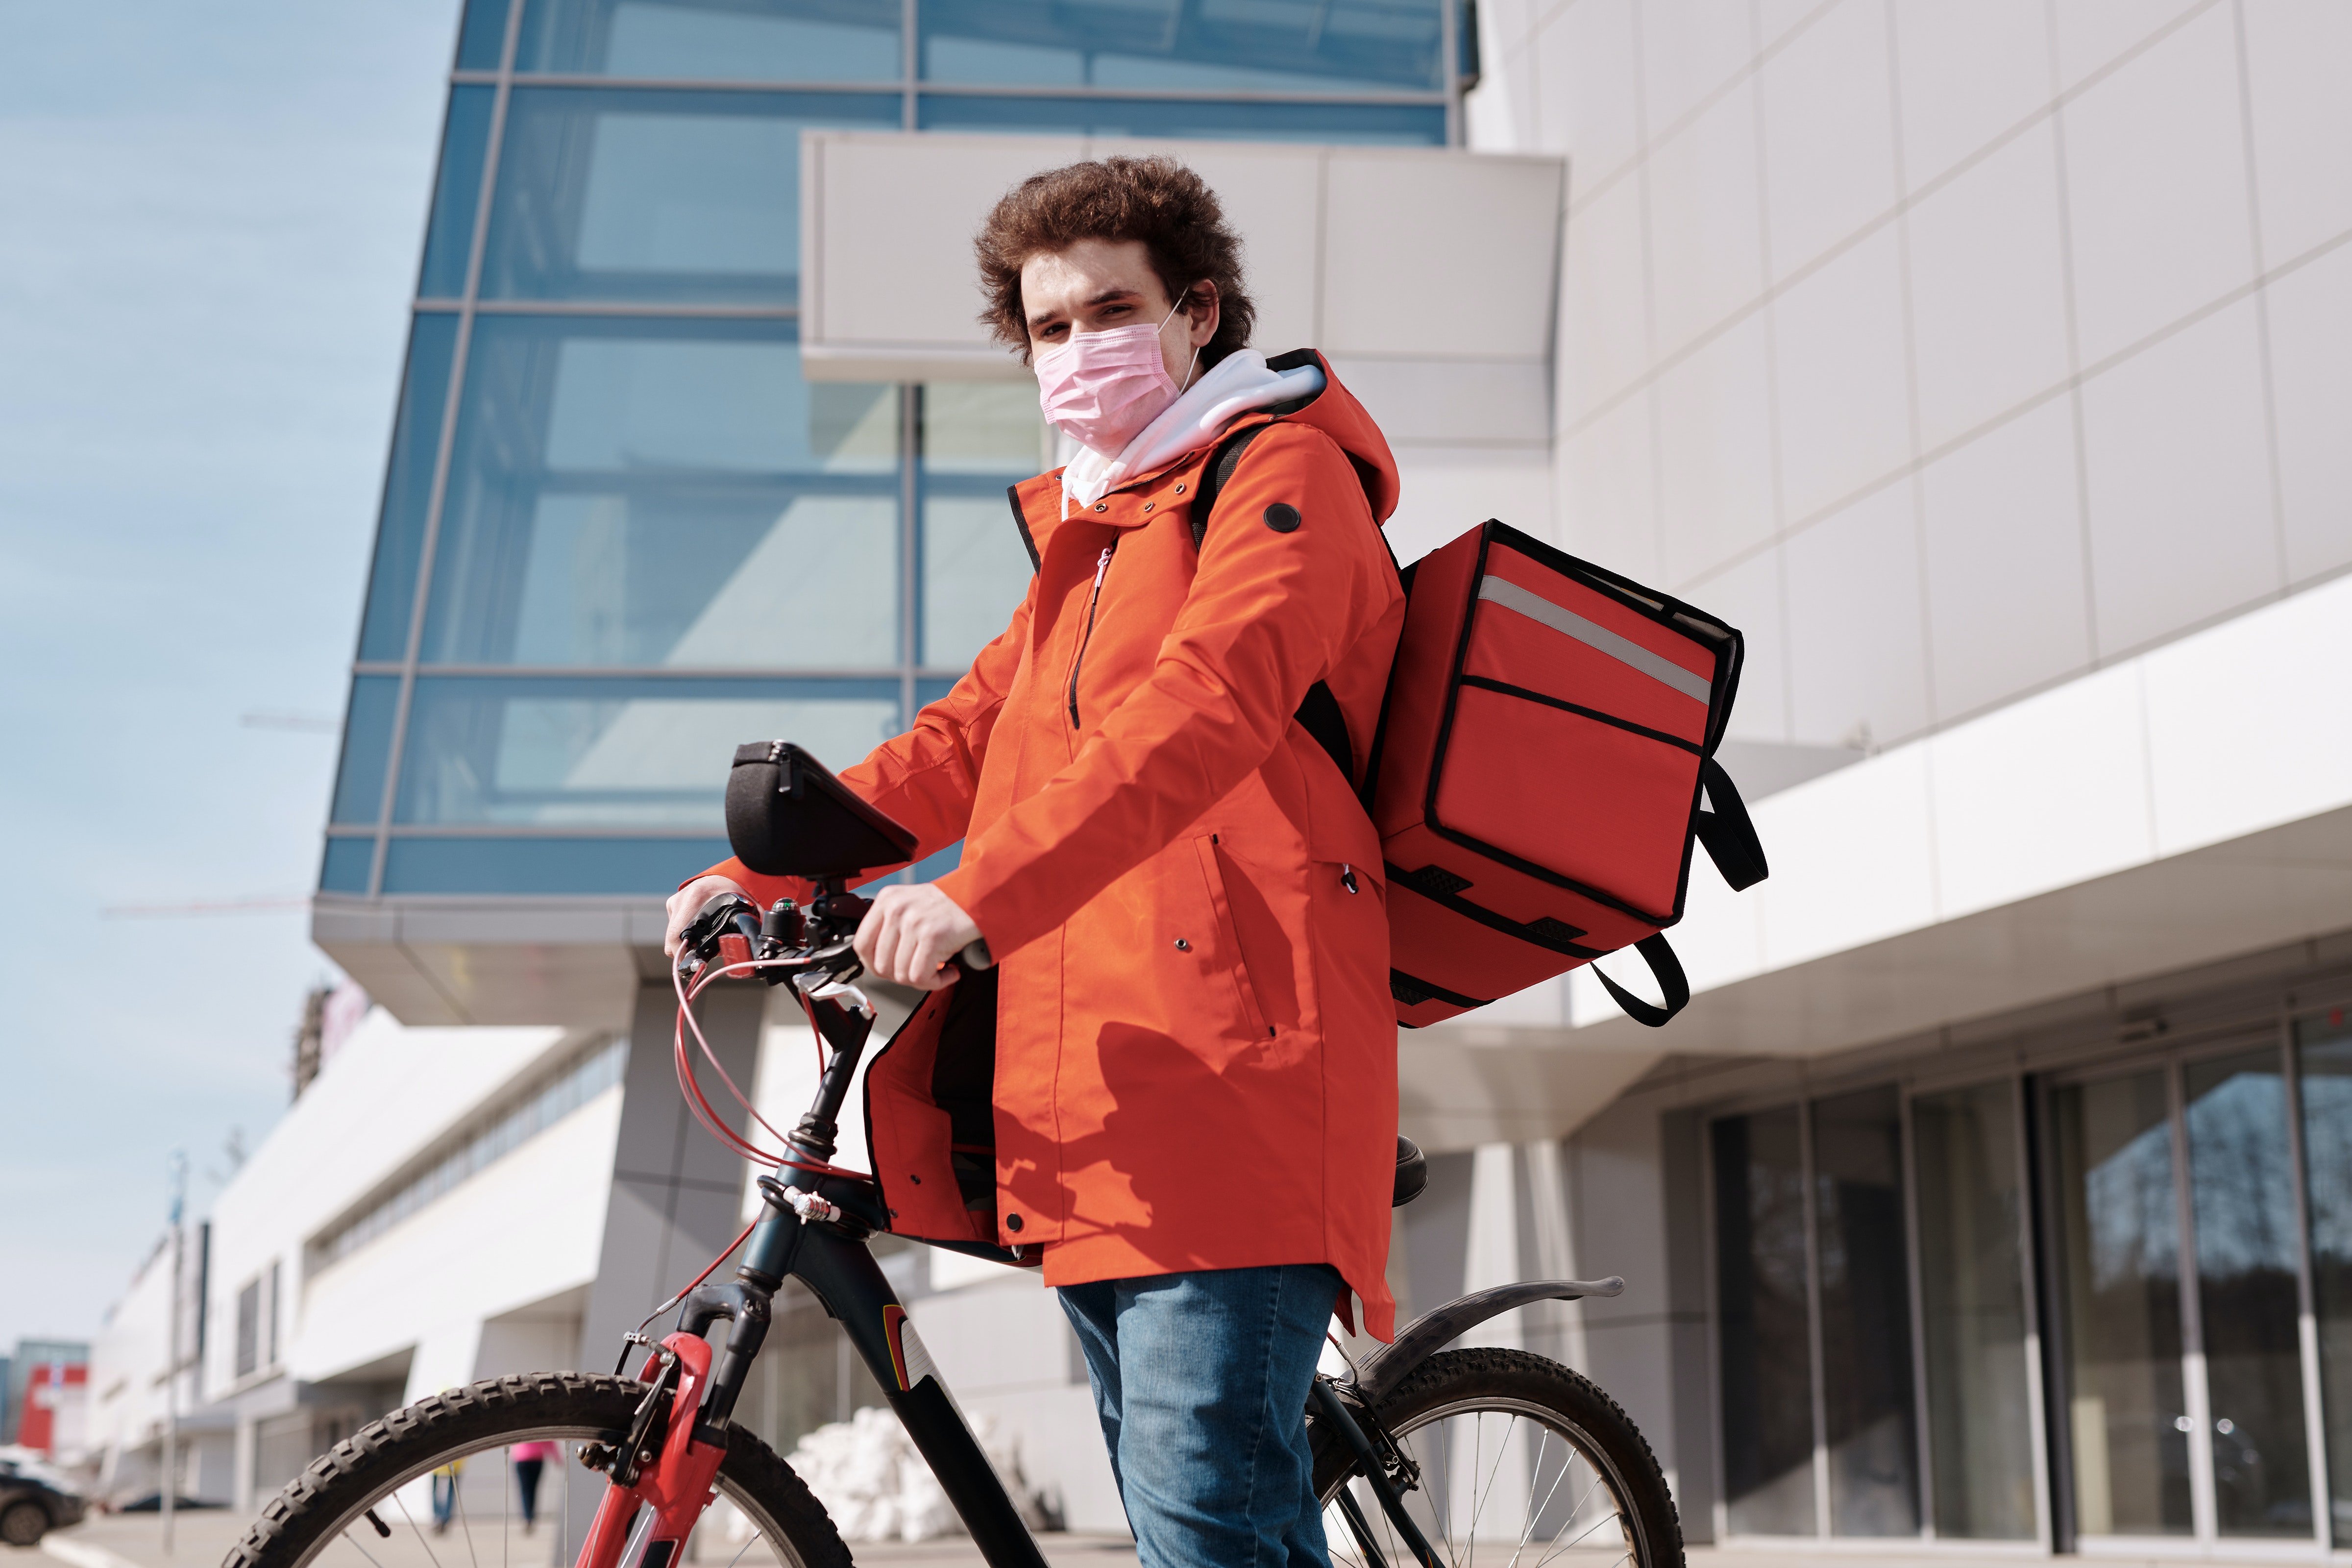 Delivery man wearing a face mask and riding a bicycle | Source: Pexels